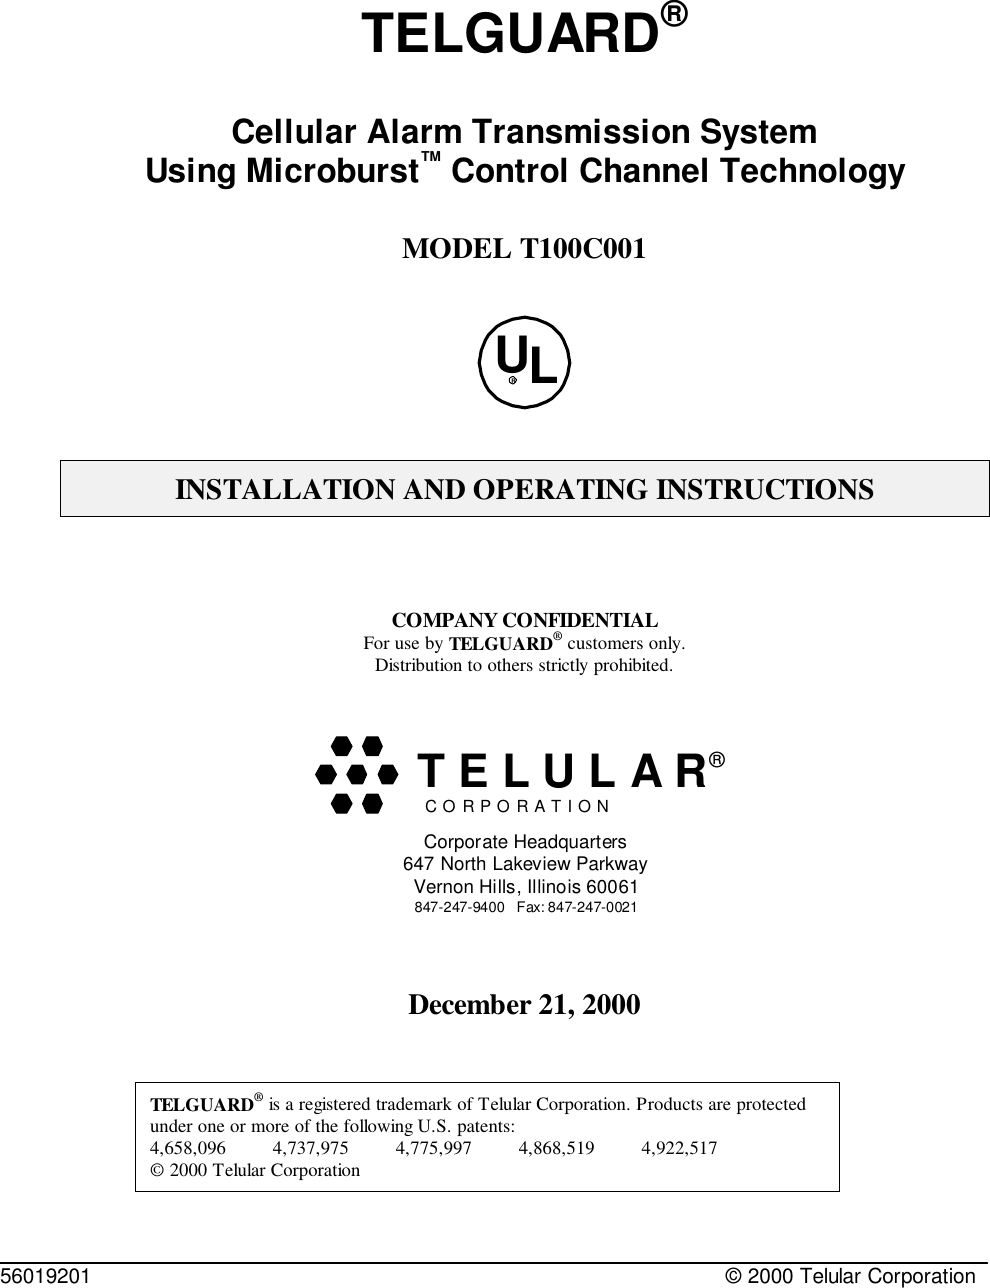 56019201 © 2000 Telular CorporationTELGUARD®Cellular Alarm Transmission SystemUsing Microburst™ Control Channel TechnologyMODEL T100C001ULRINSTALLATION AND OPERATING INSTRUCTIONSCOMPANY CONFIDENTIALFor use by TELGUARD® customers only.Distribution to others strictly prohibited.December 21, 2000TELGUARD® is a registered trademark of Telular Corporation. Products are protectedunder one or more of the following U.S. patents:             4,658,096         4,737,975         4,775,997         4,868,519         4,922,517       © 2000 Telular CorporationC O R P O R A T I O N®Corporate Headquarters647 North Lakeview ParkwayVernon Hills, Illinois 60061847-247-9400   Fax: 847-247-0021  T E L U L A R